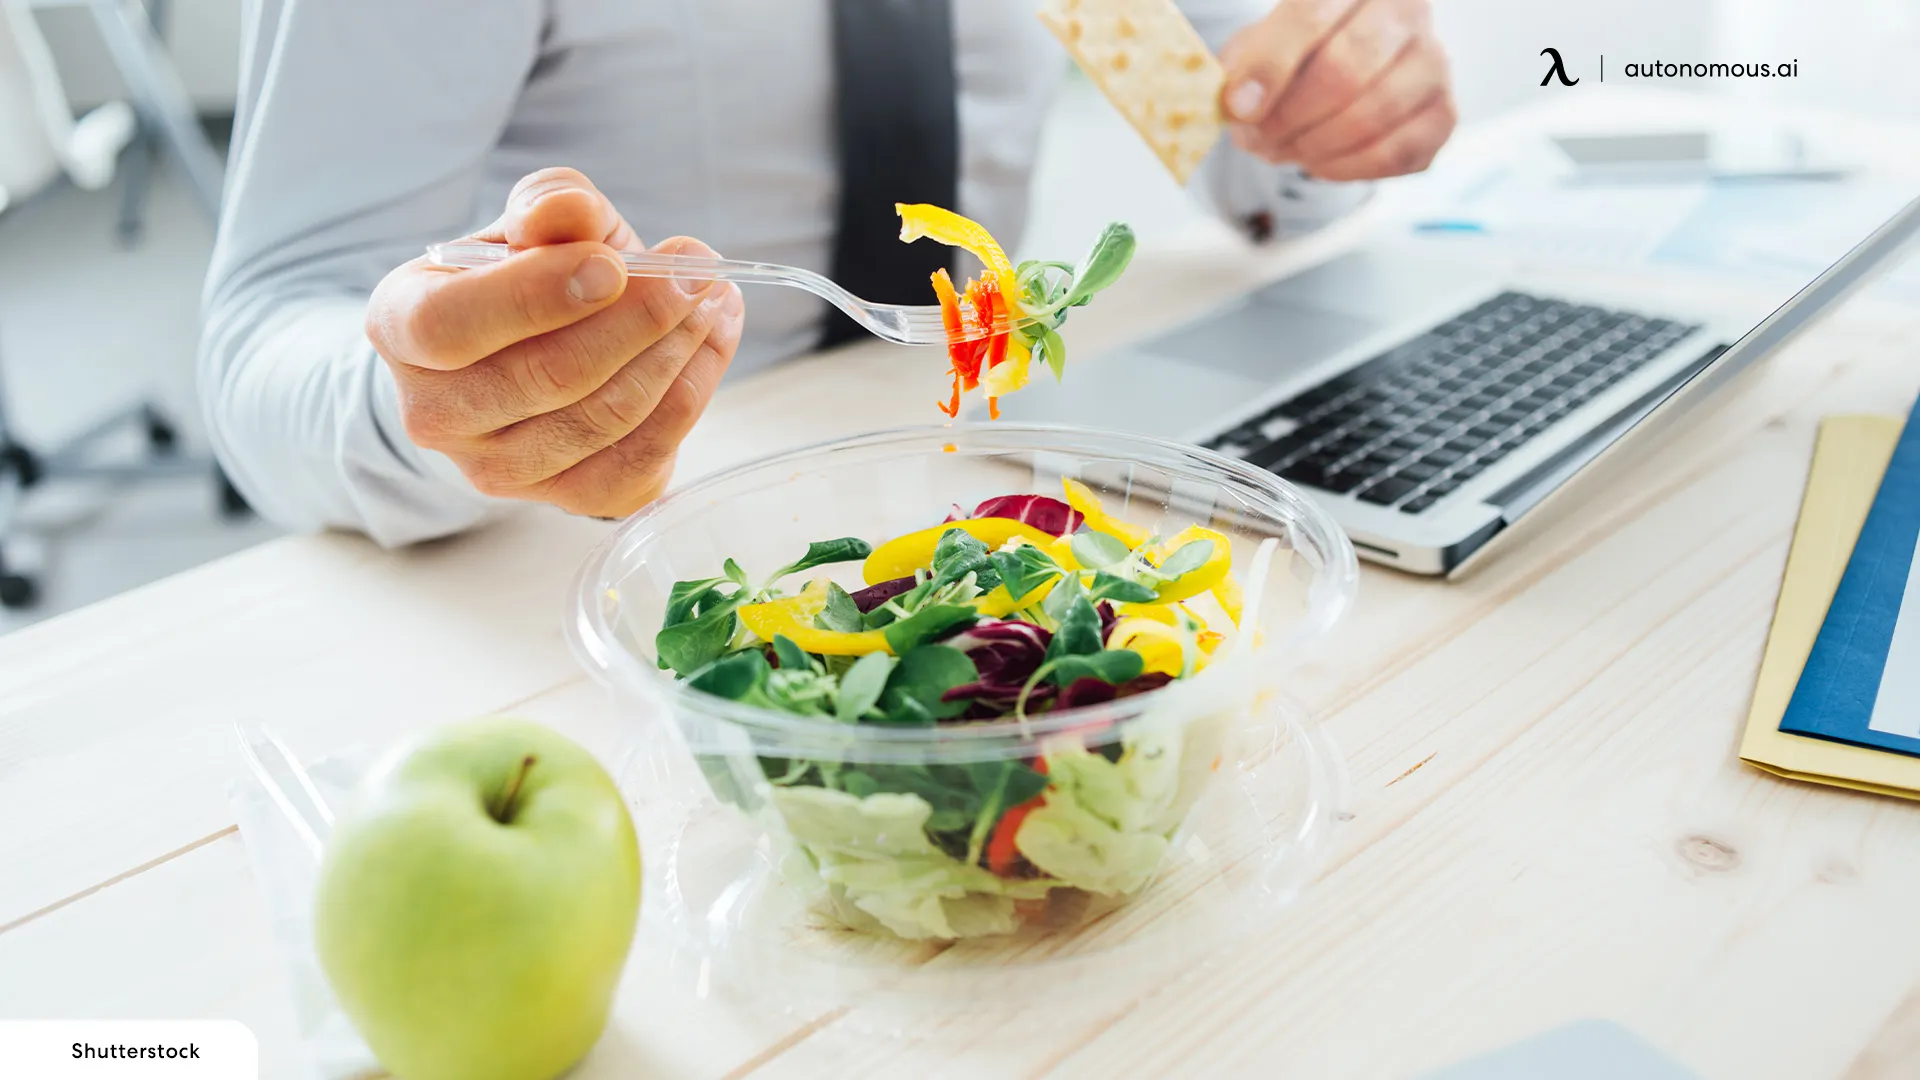 Quick and Healthy Meal Ideas for Busy Work Days